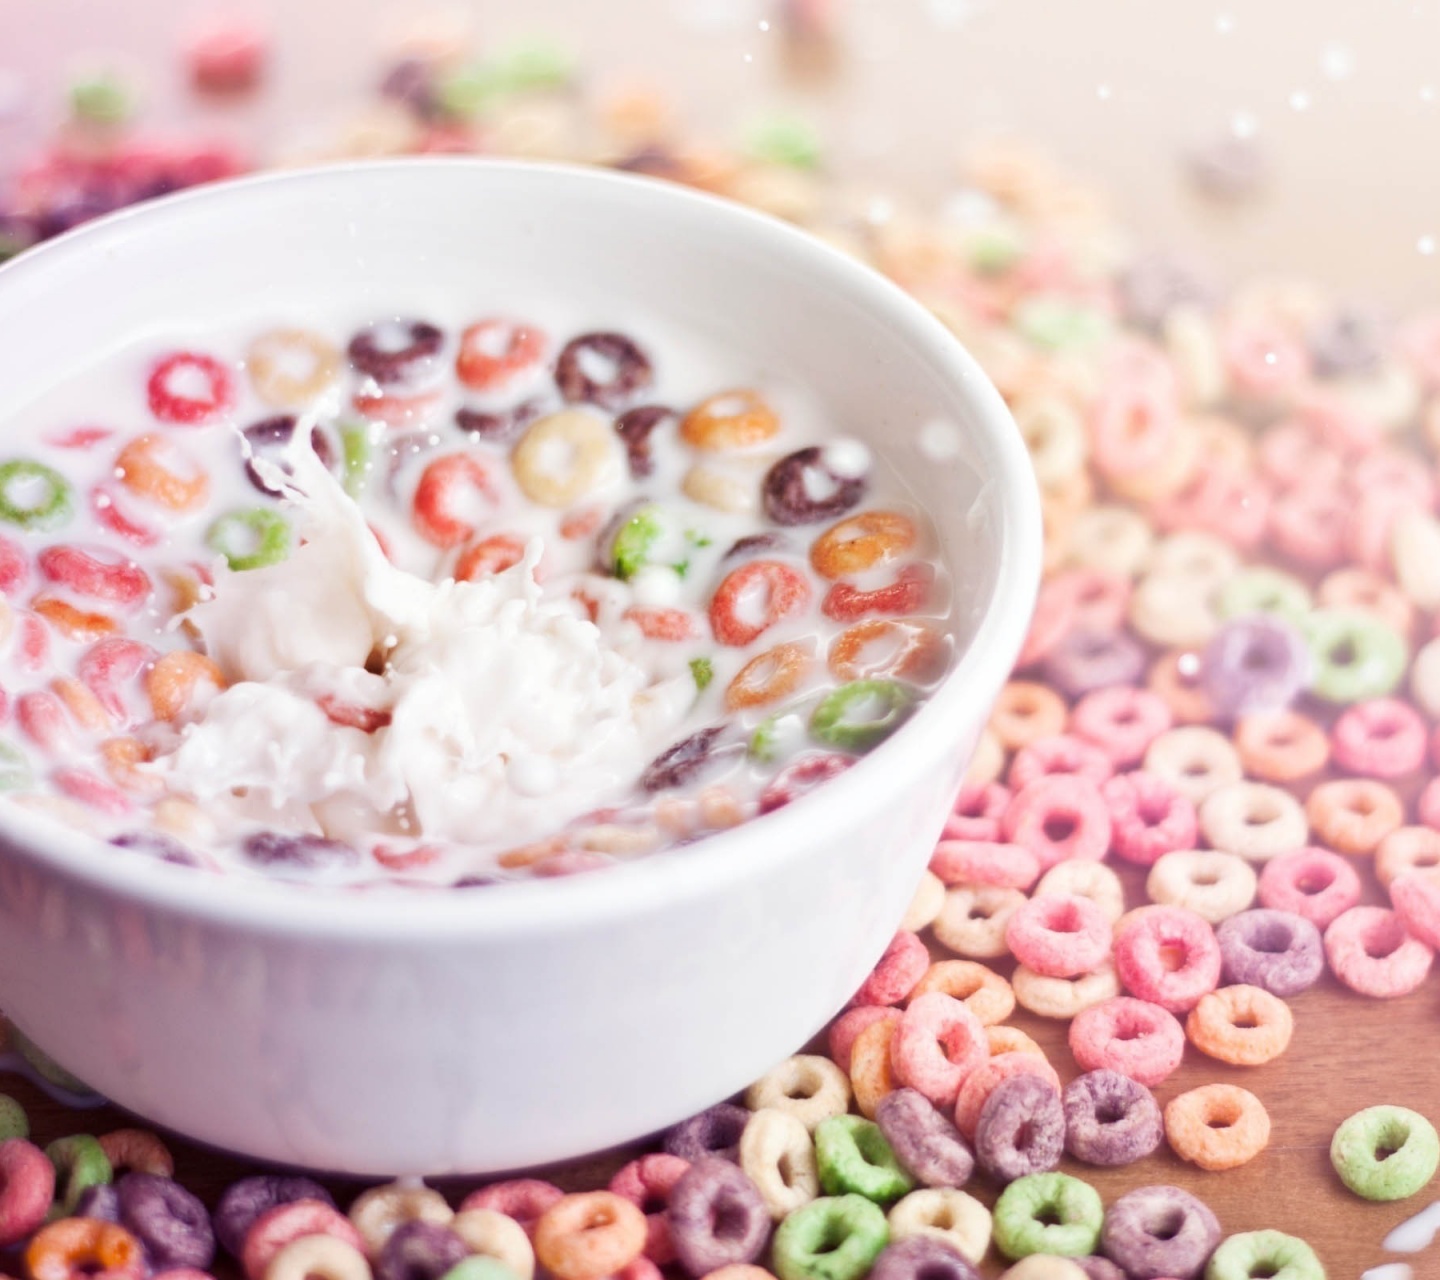 Bowl Of Cereal And Milk